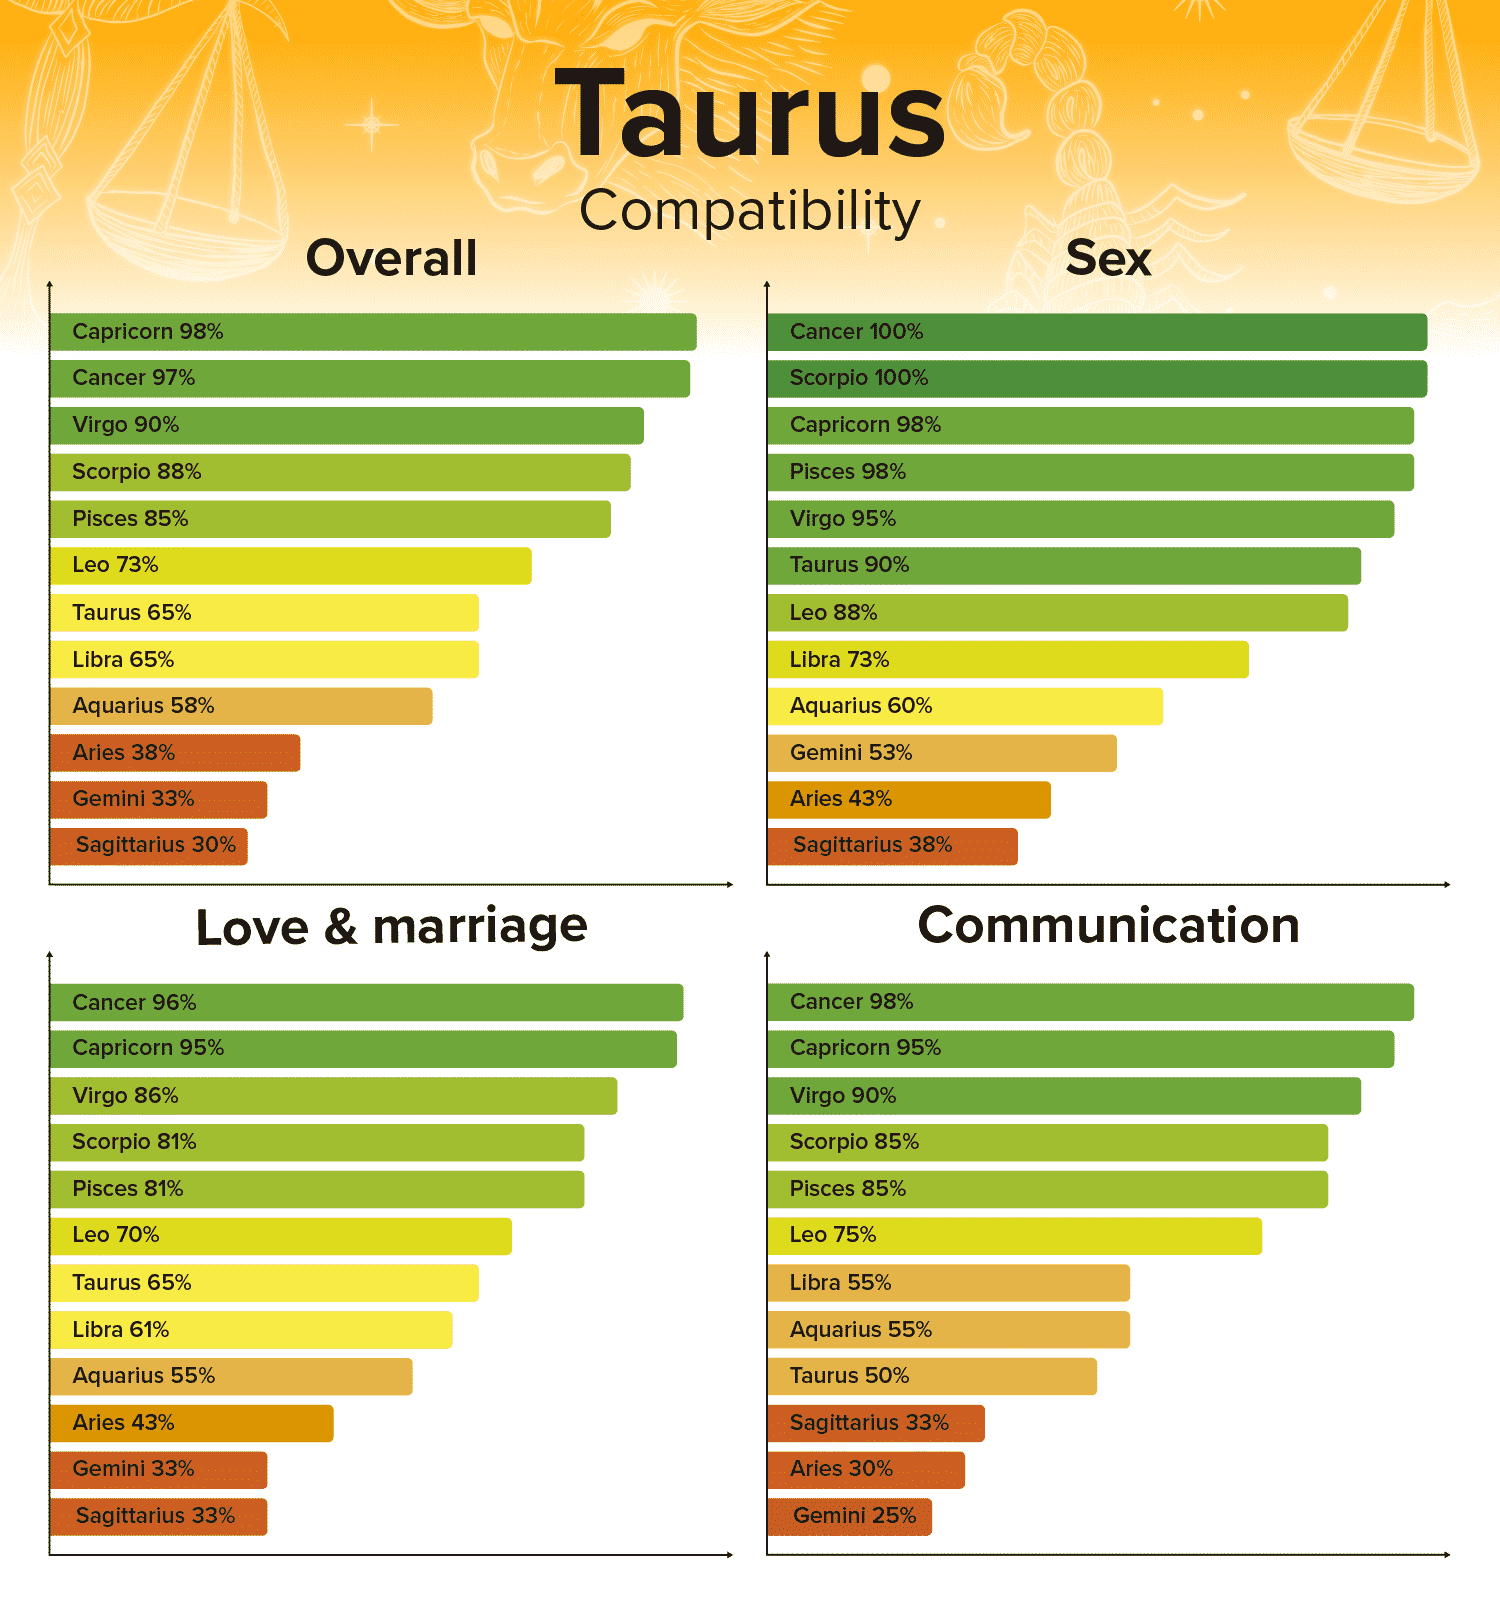 What horoscopes are compatible with taurus